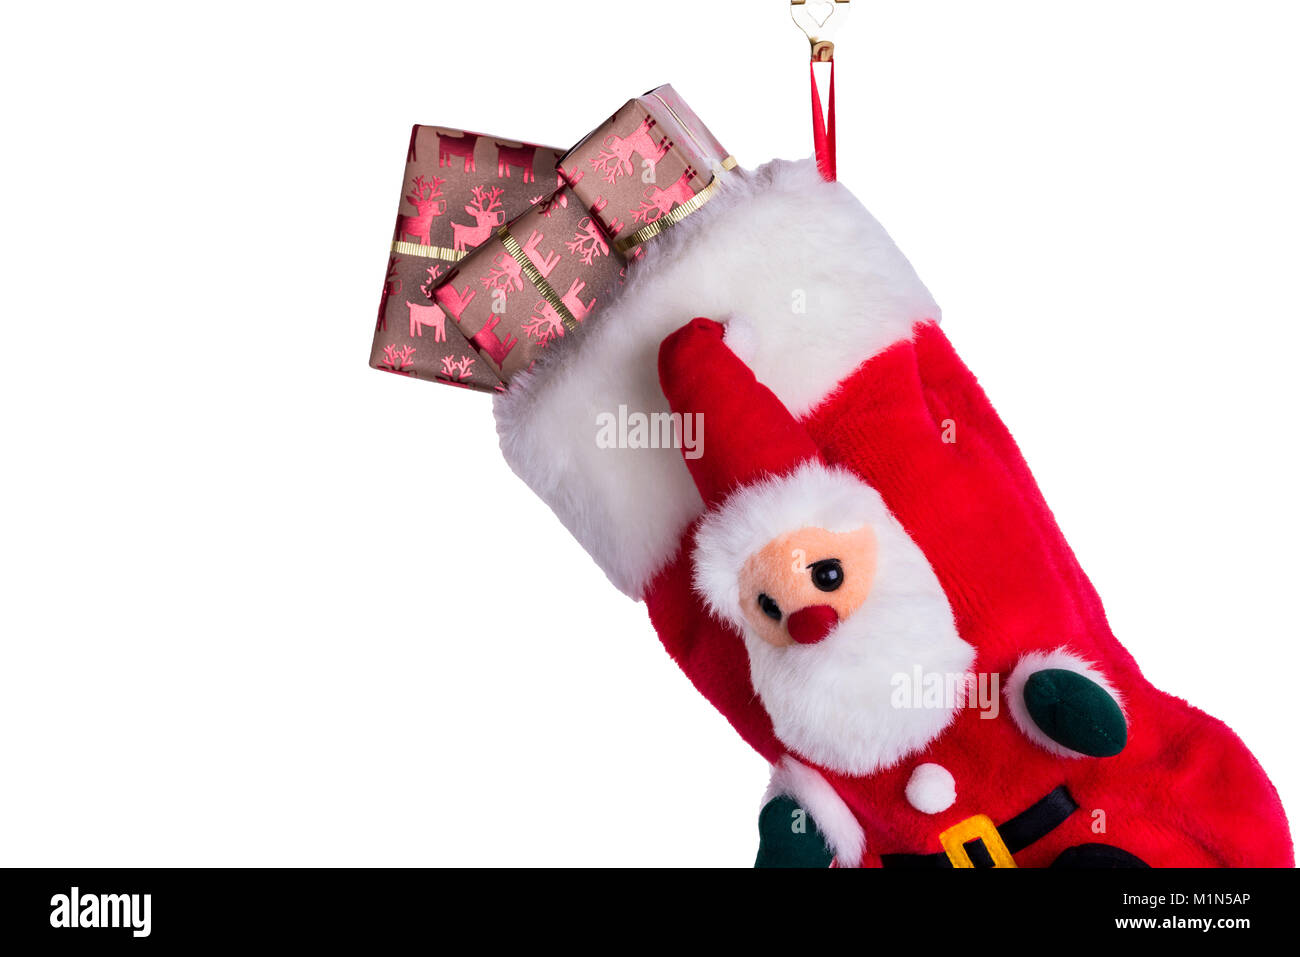 Traditional Christmas or Xmas stocking, filled with gift wrapped presents or gifts. Stock Photo